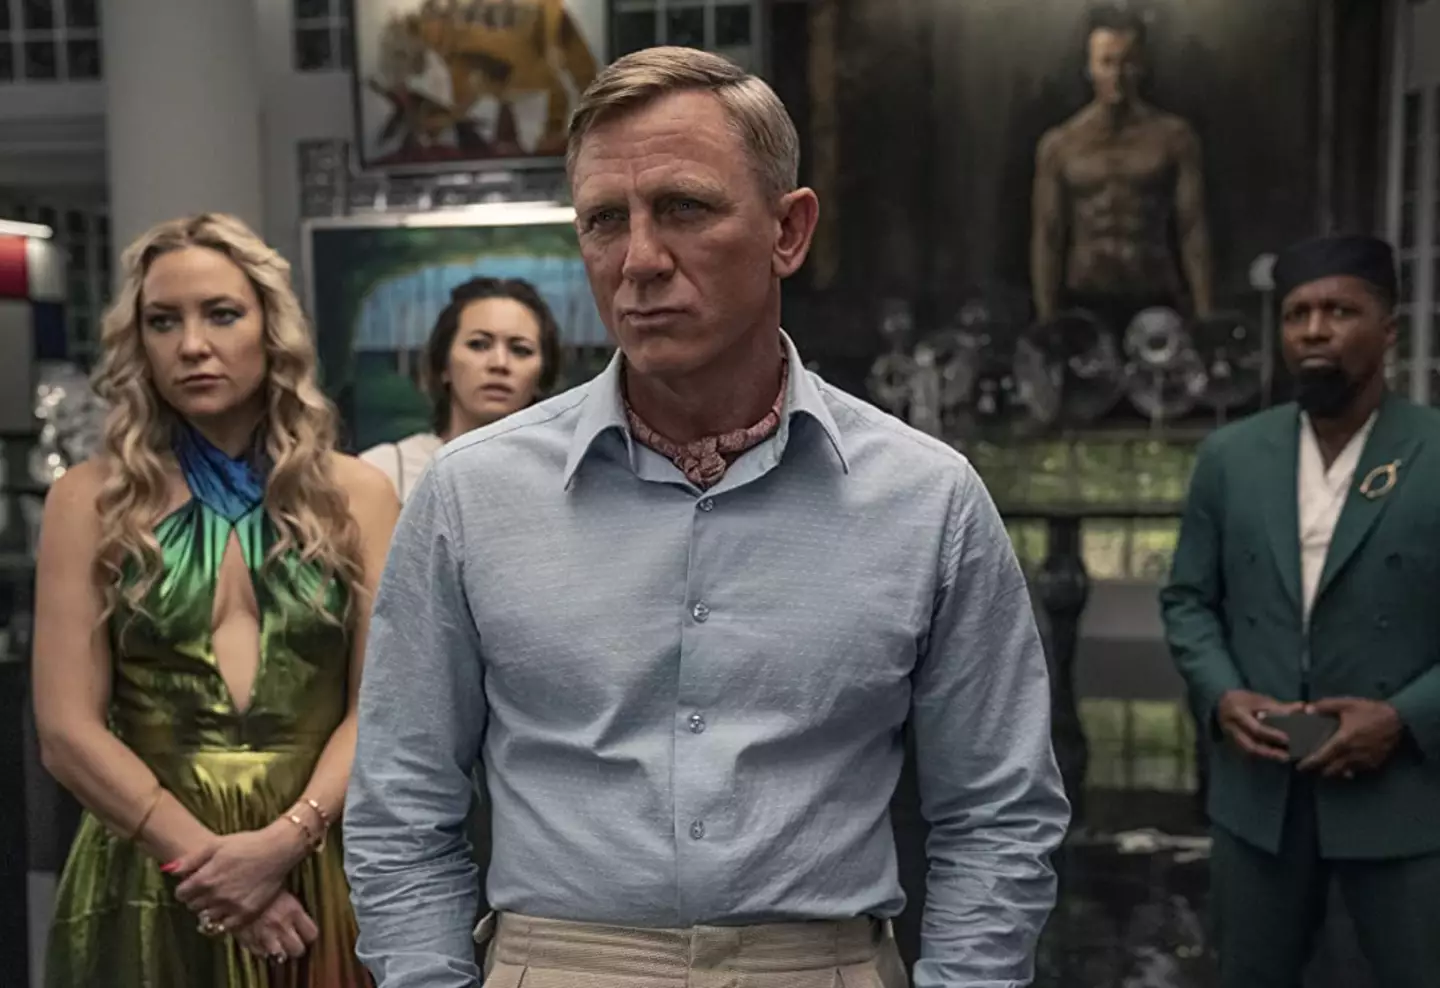 A line said by Daniel Craig has been hailed the most 'powerful' in the film.